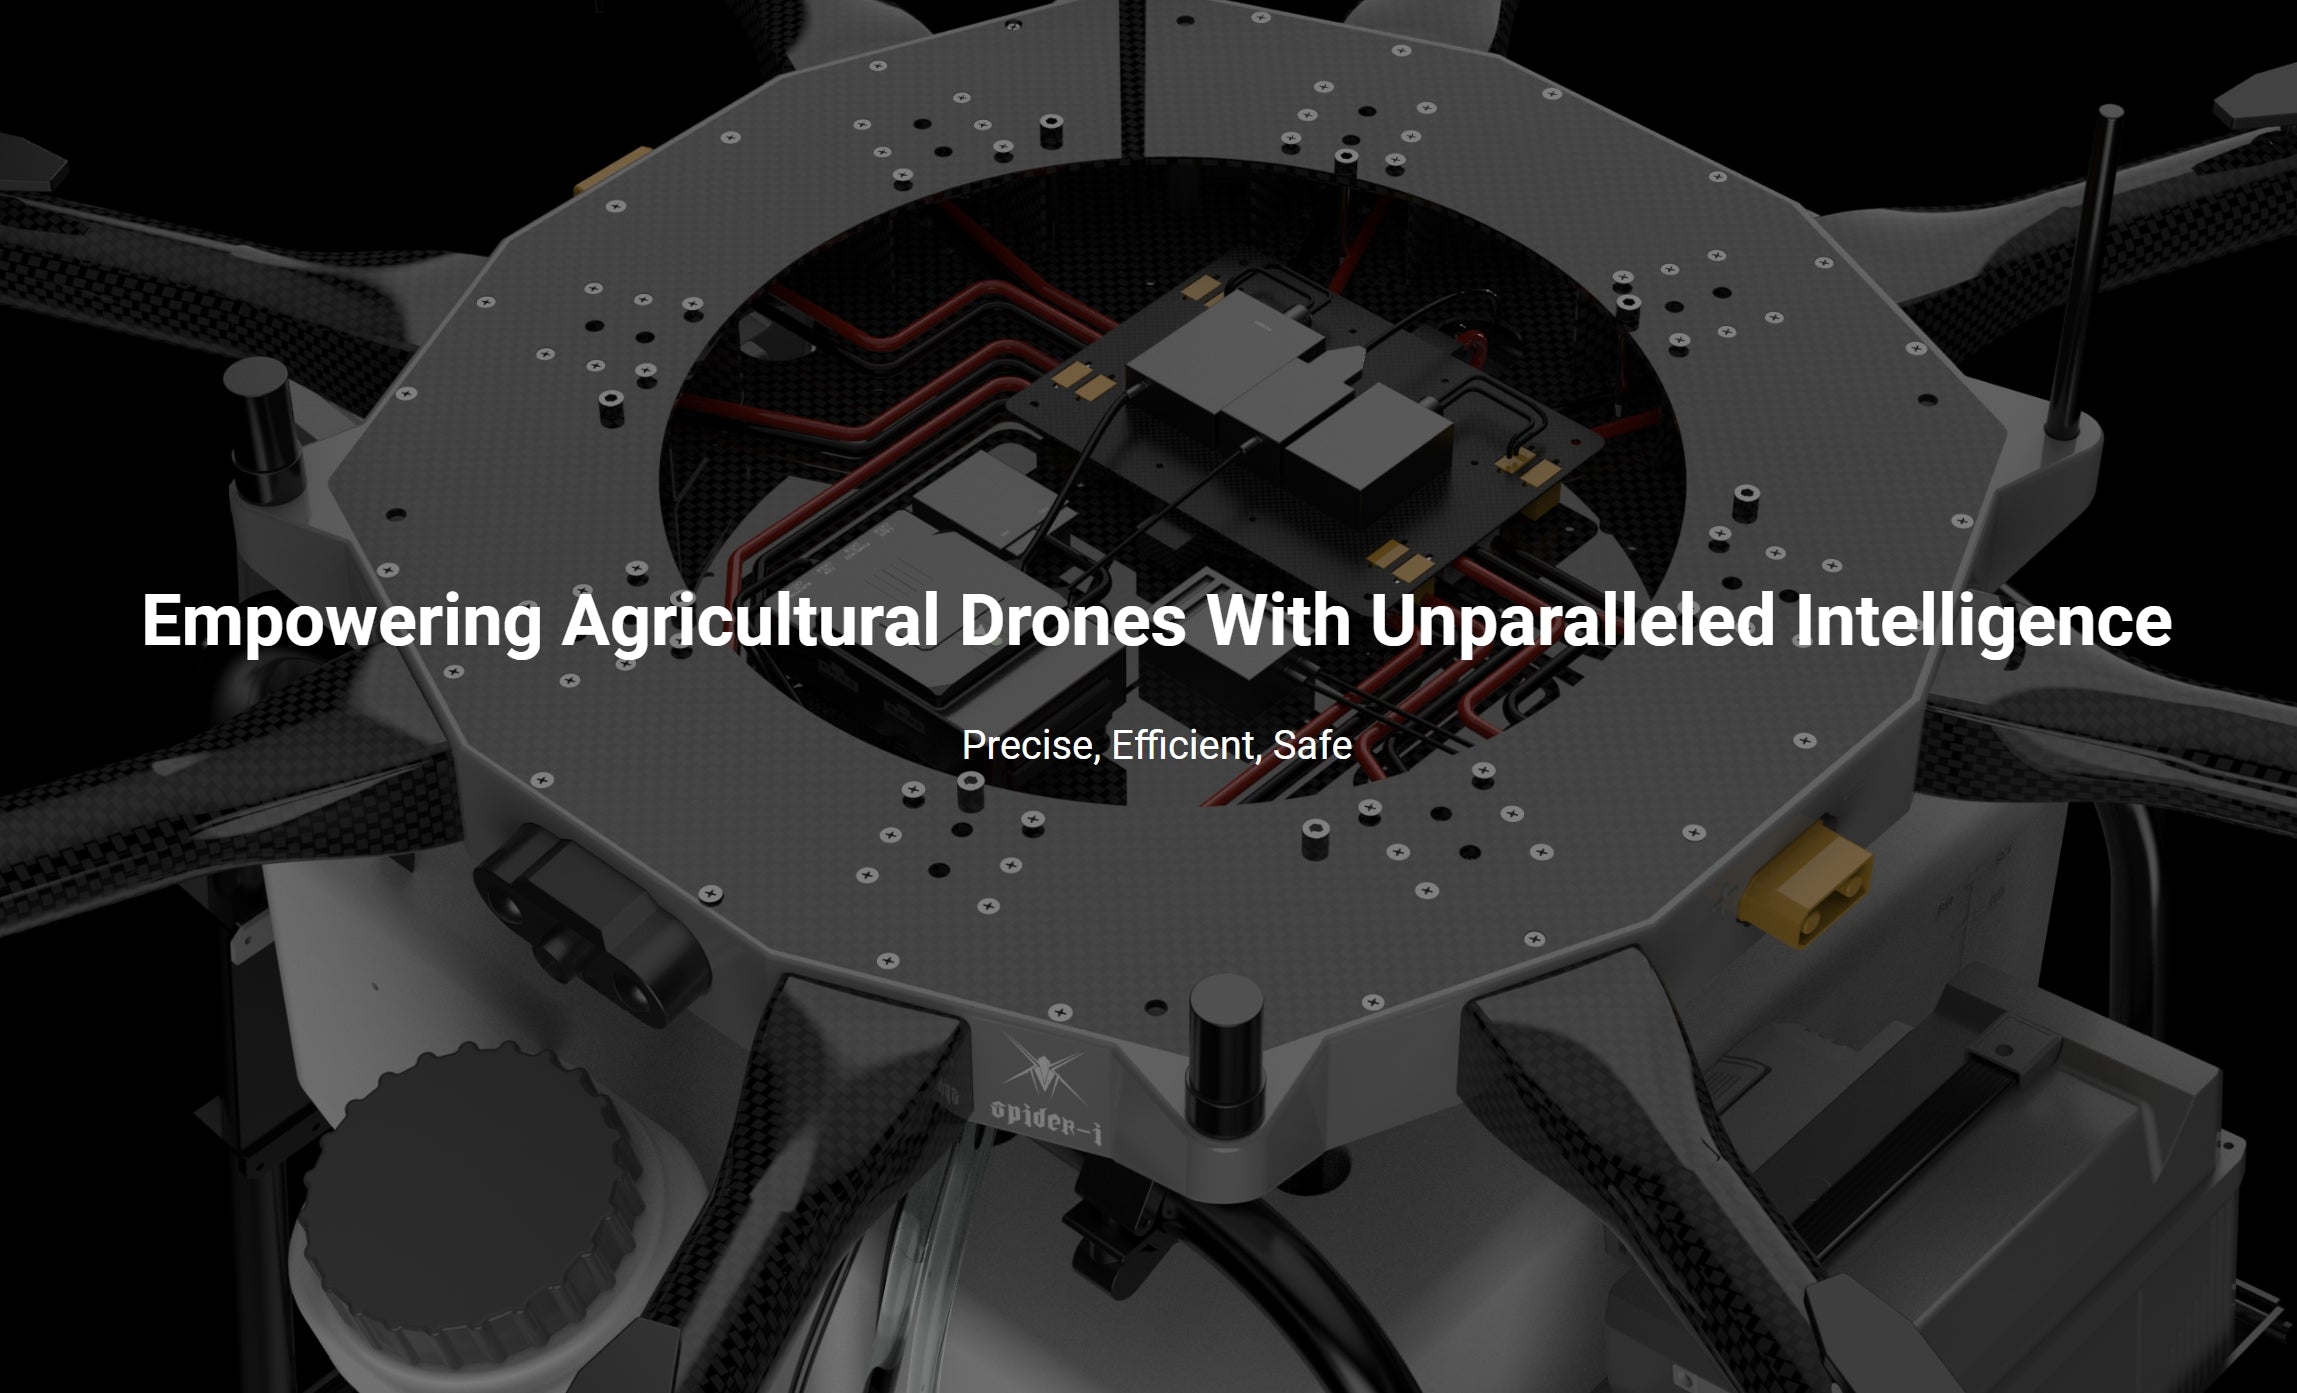 H200 Agricultural / Transport Drone, Empowering Agricultural Drones With Unparalleled Intelligence Precis